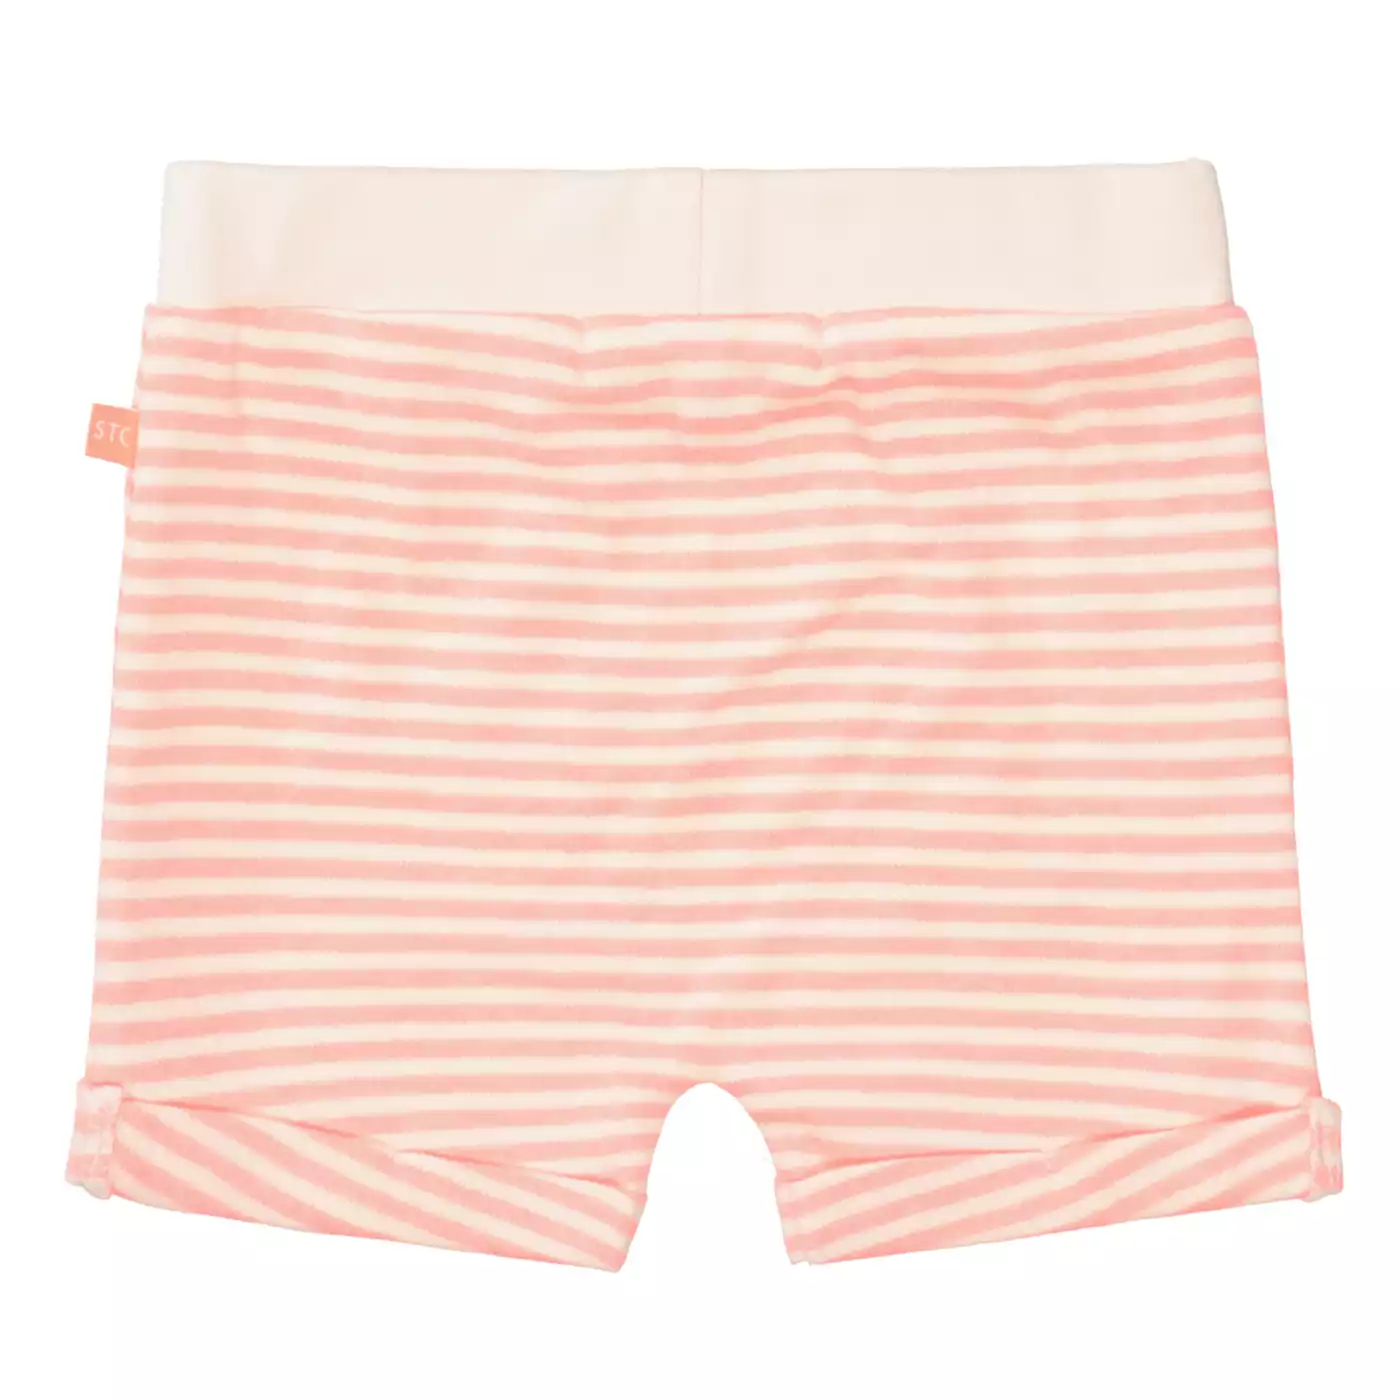 Shorts Neon Coral STACCATO Pink Rosa 2005580296100 4